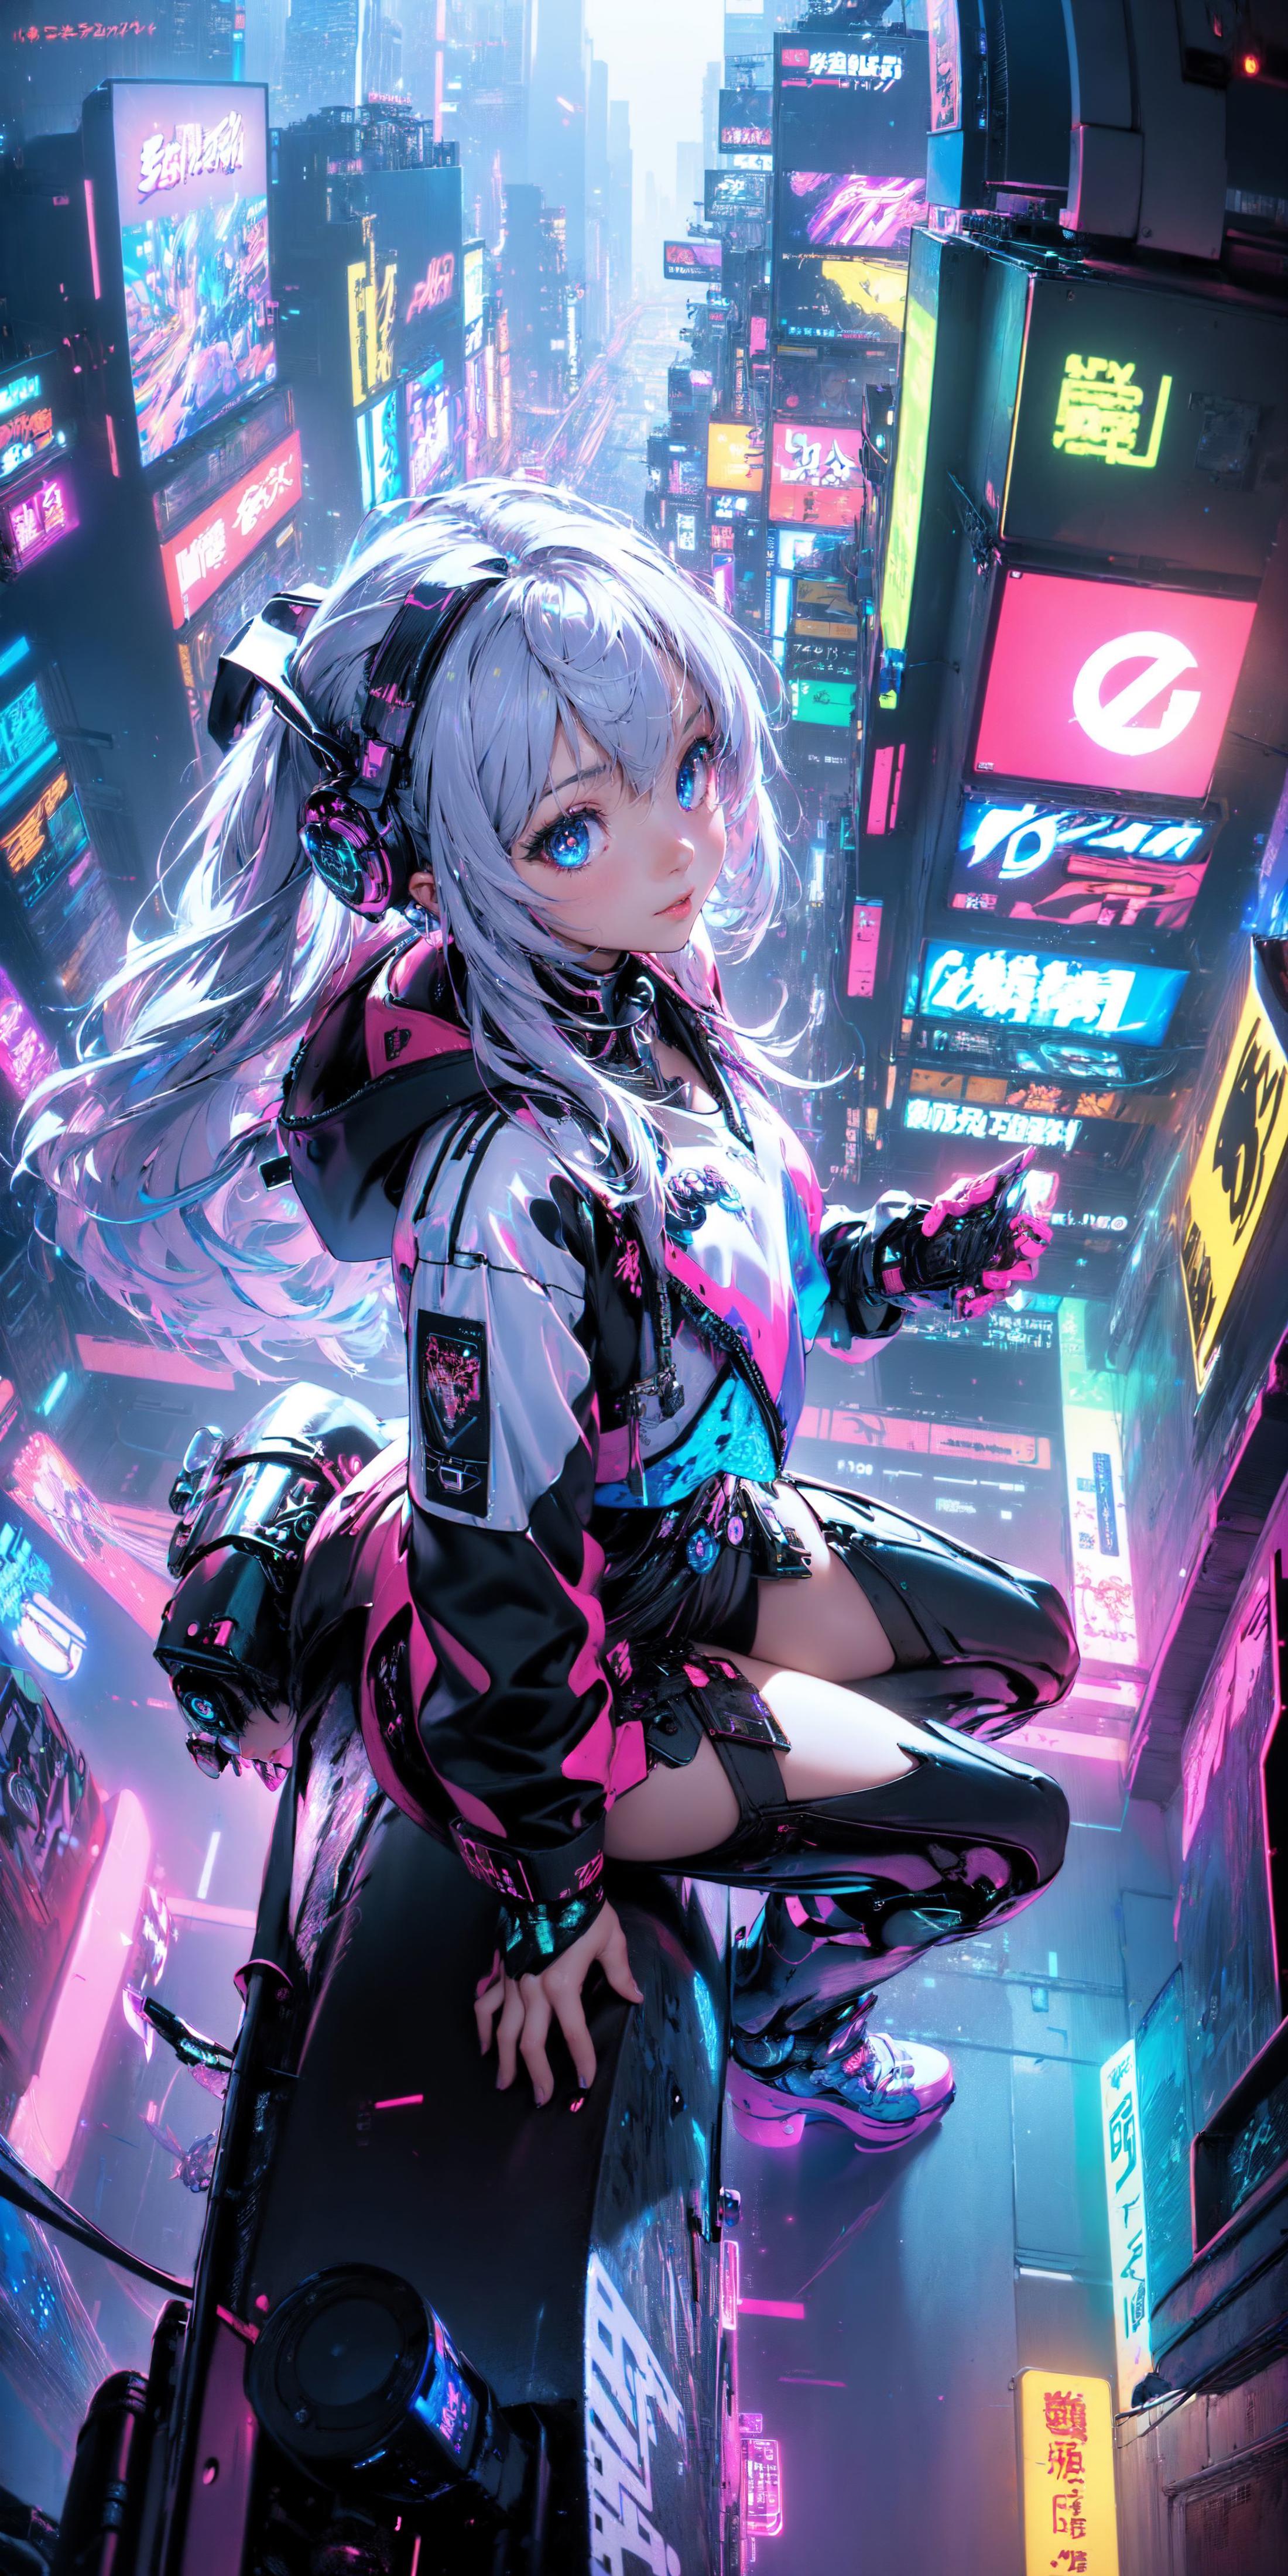 Anime-Inspired Female Characters with Large Eyes and Futuristic Clothing